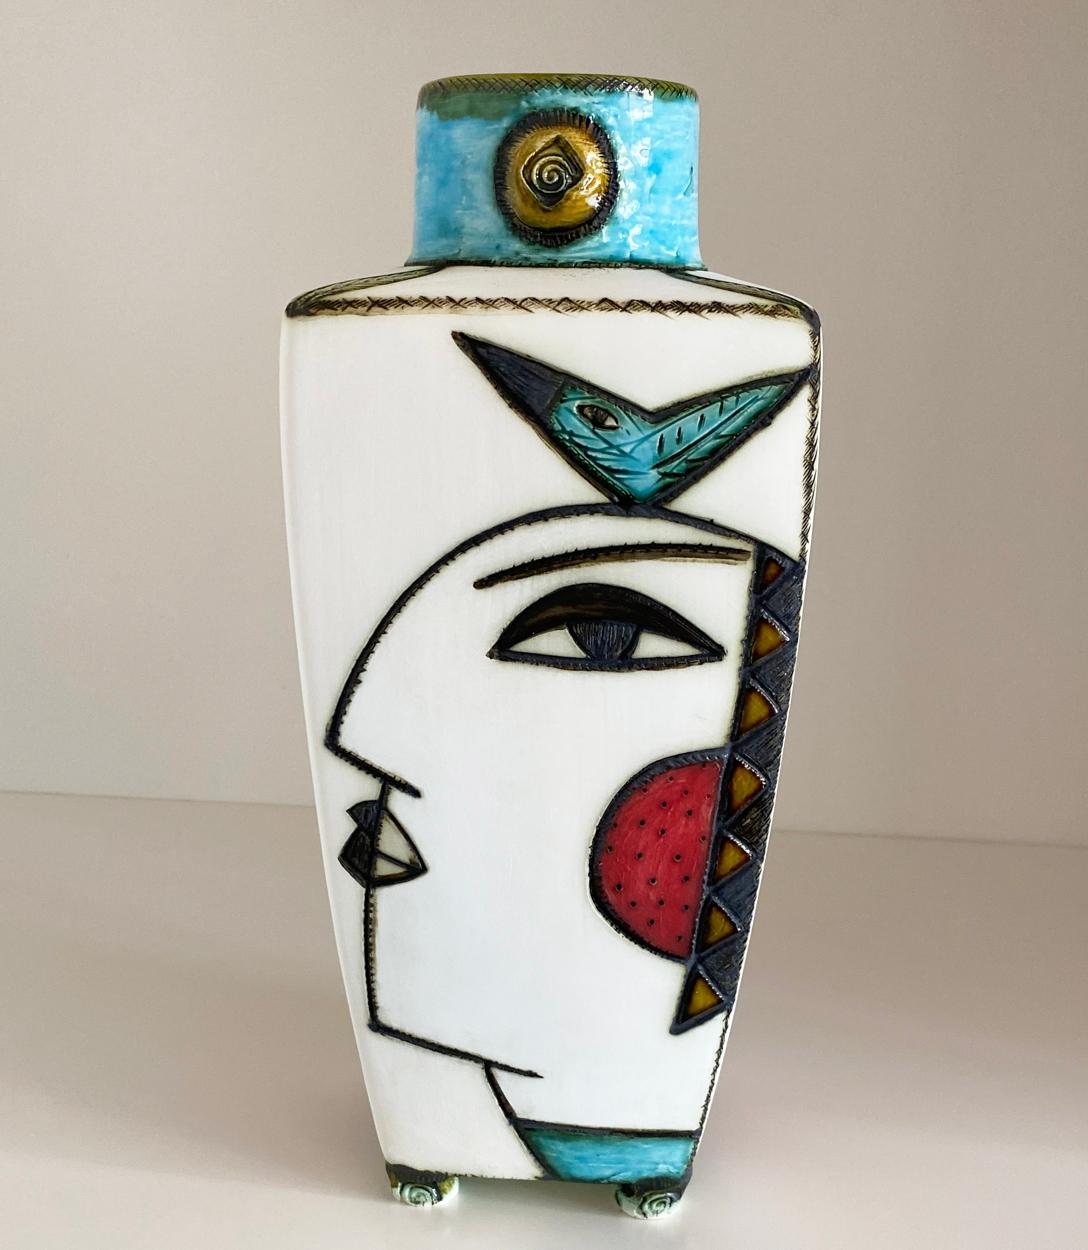 A large pottery vase by widely collected South African ceramicist Charmaine Haines, produced 2020.


Charmaine Haines was born in 1963 in Grahamstown and trained under Hylton Nel at the Port Elizabeth Technikon and obtained a Higher Diploma in